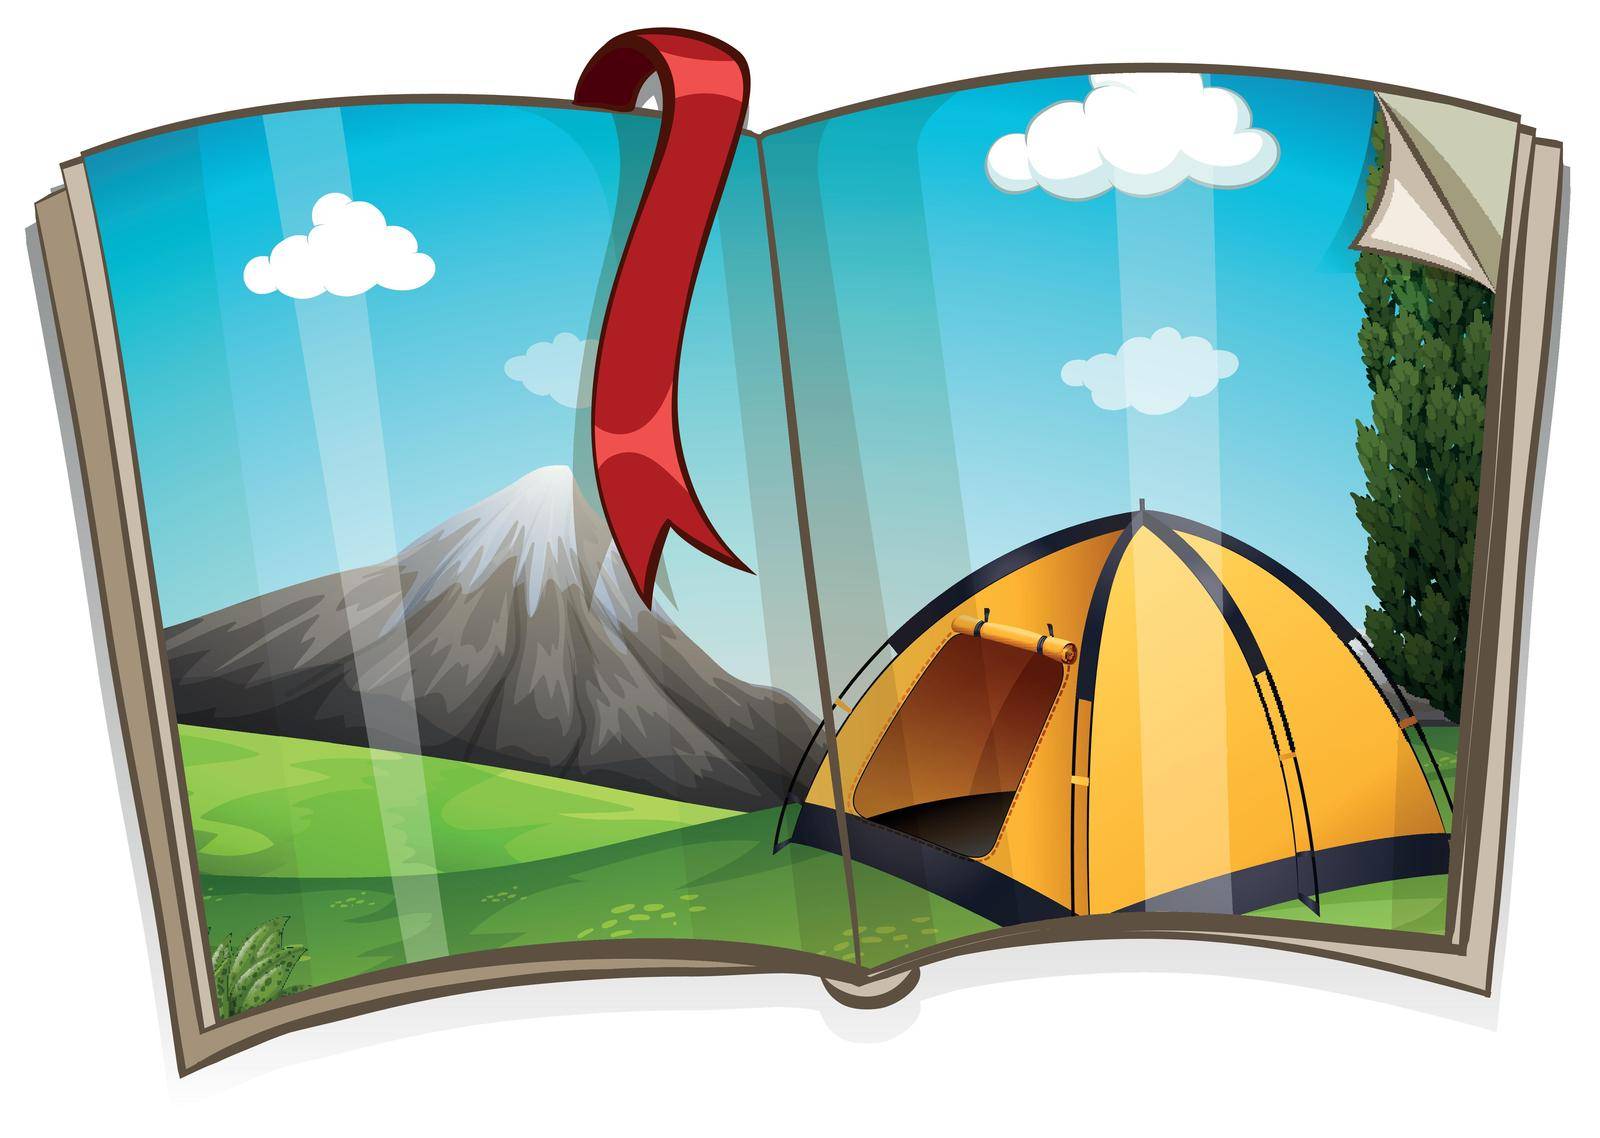 Camping site in the book by iimages